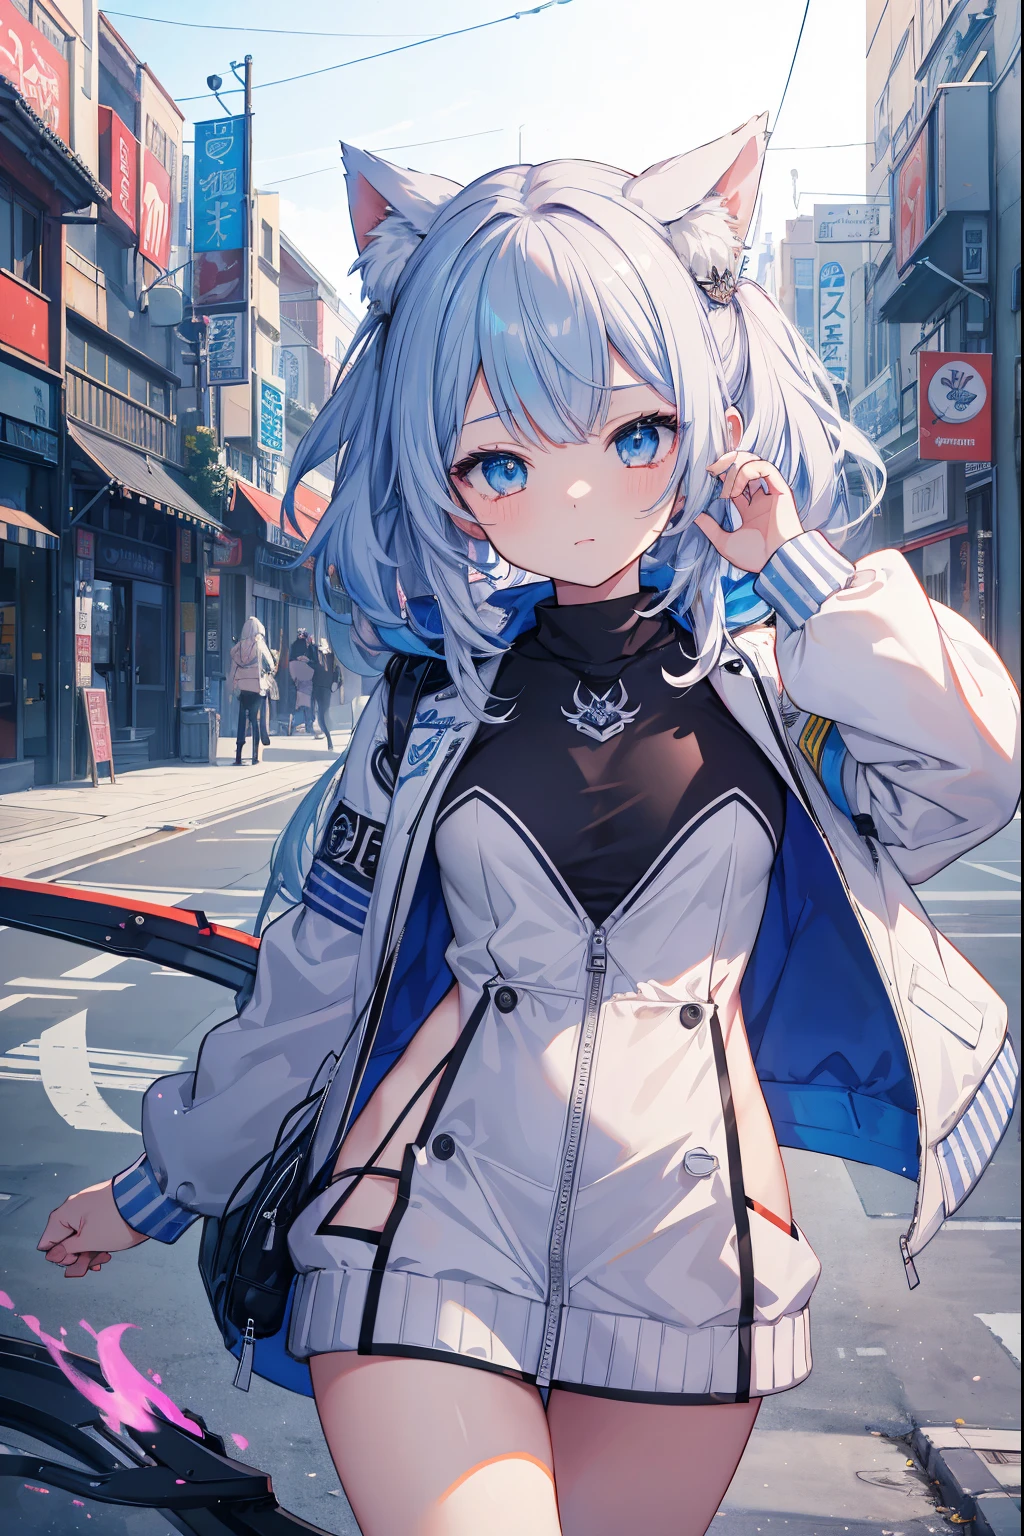 Masterpiece, top-notch quality, 4K Ultra HD, Gura Gawr vtuber from Hololive in a white varsity jacket, posing for a photo. Art inspired by Guweiz's style, detailed digital anime artwork, impeccable artistic work.